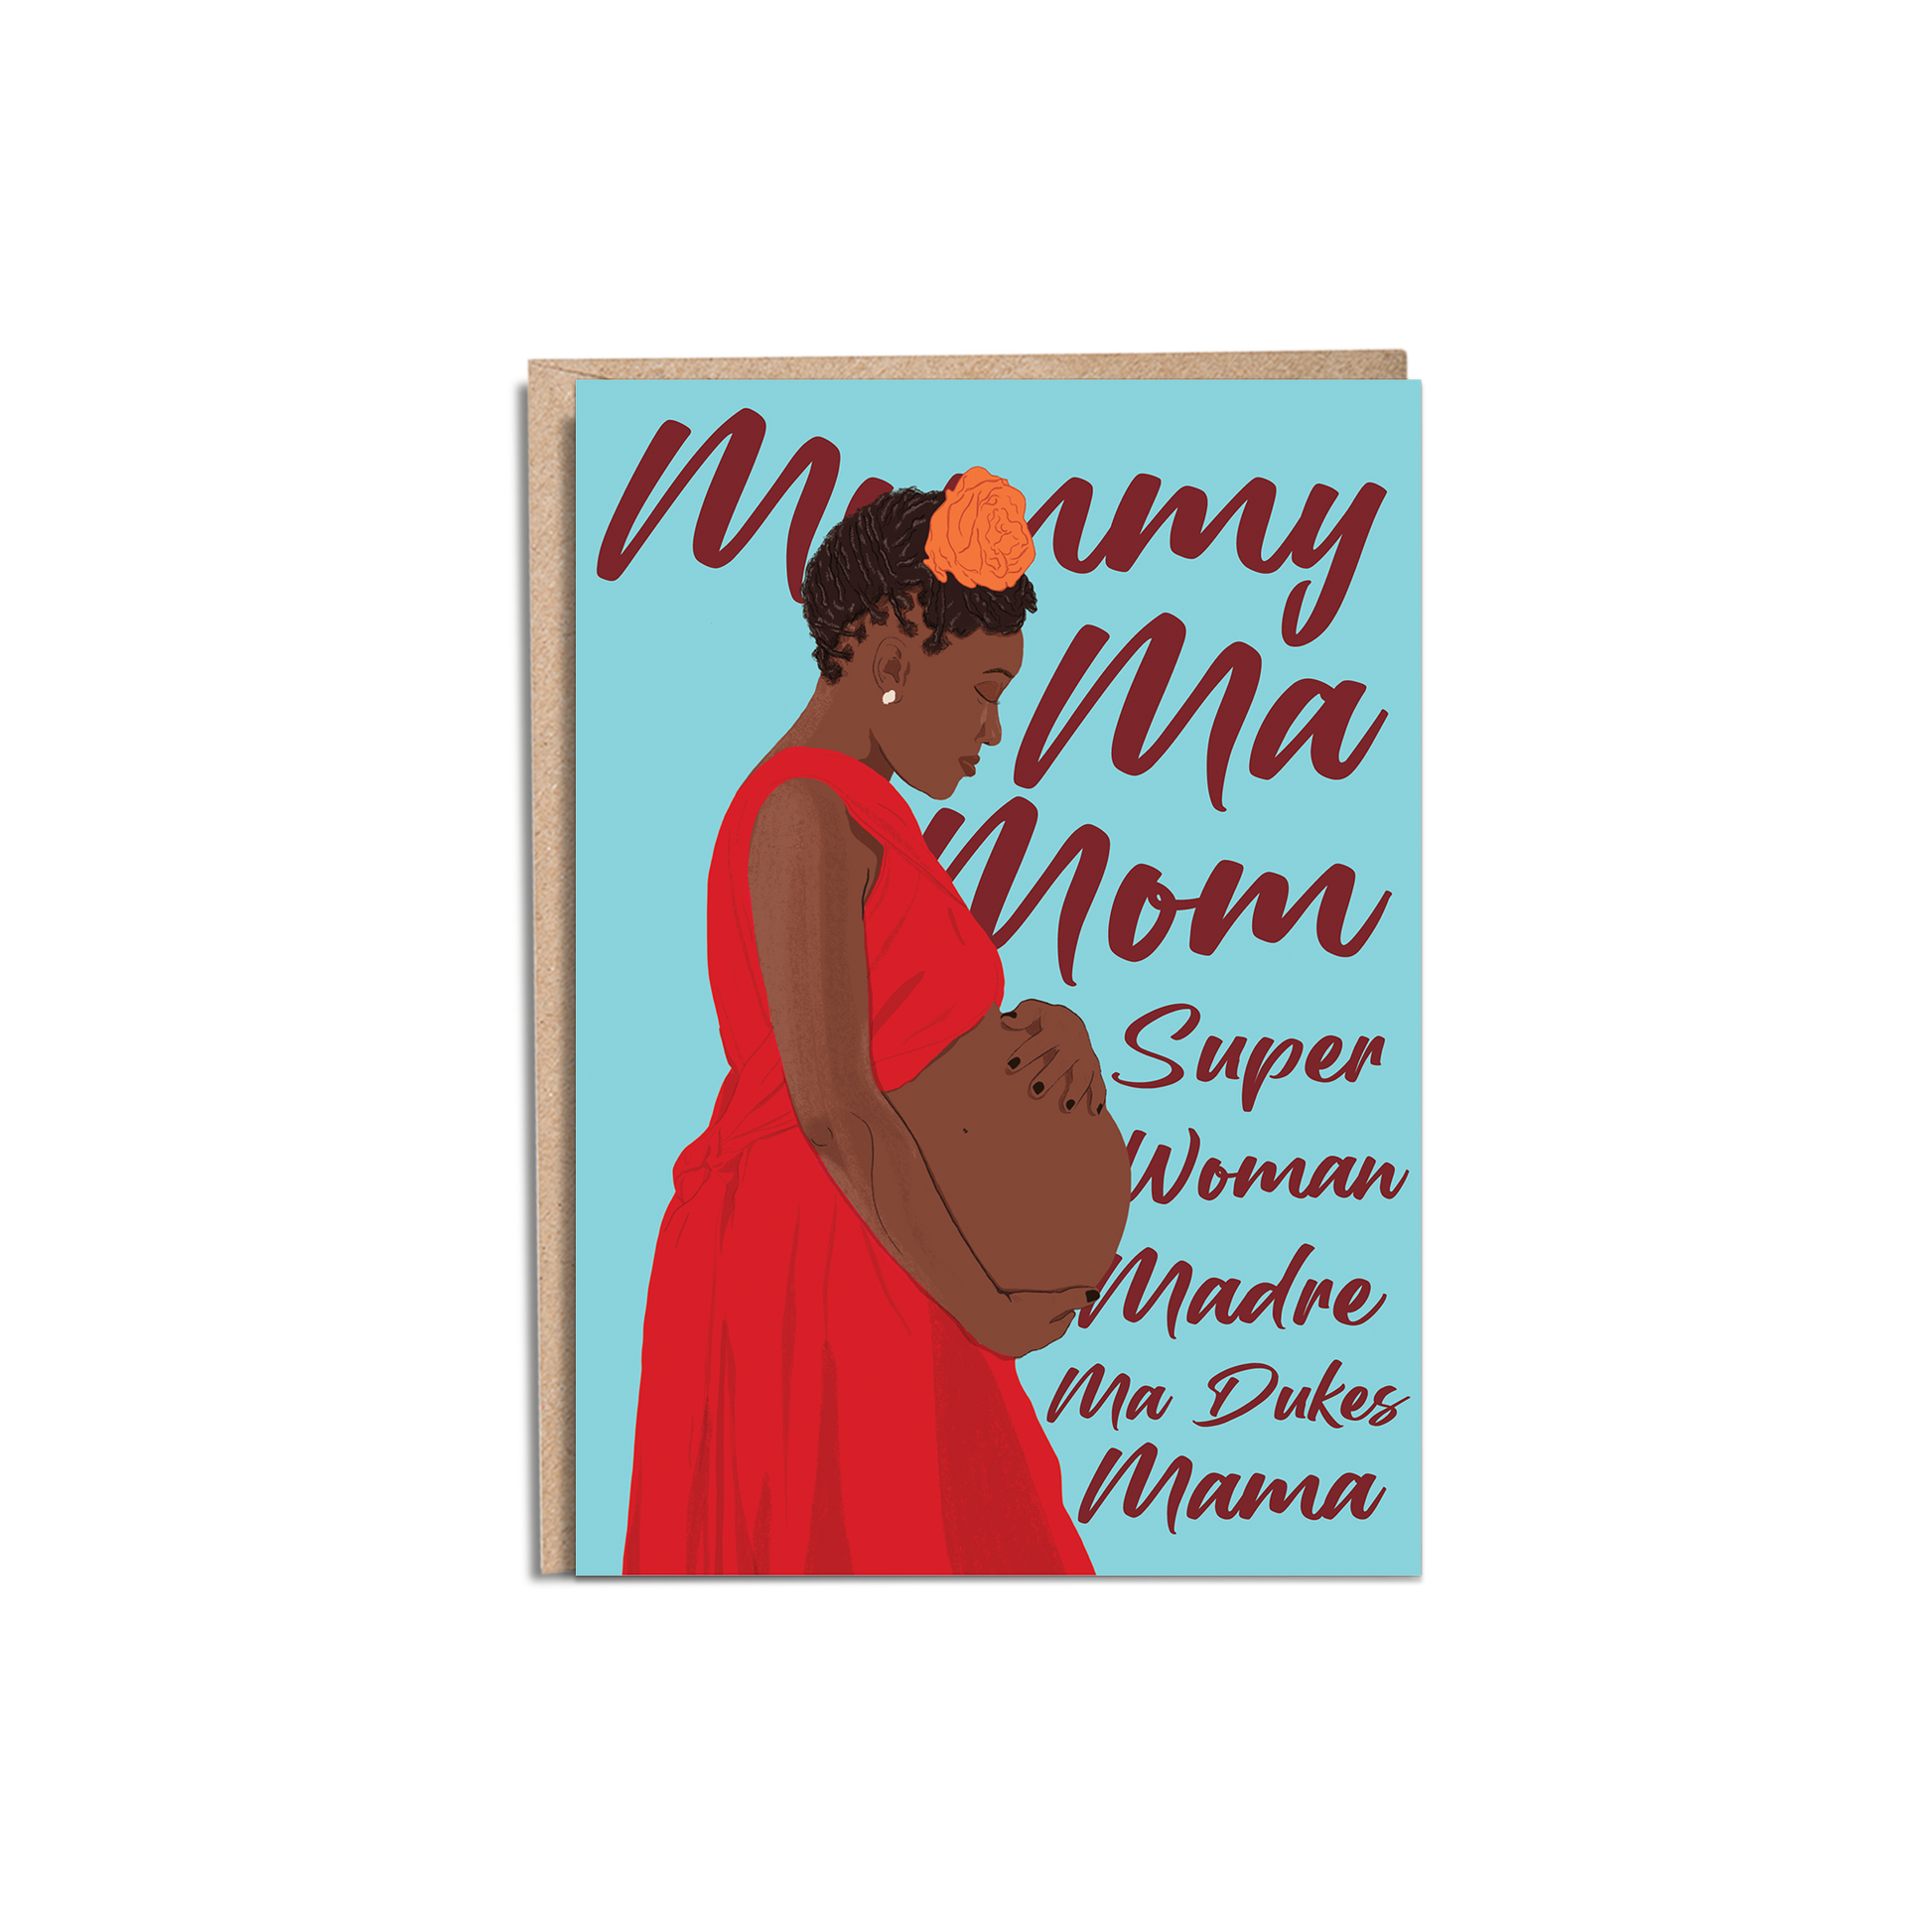 Congrats Mama 5x7” maternity new mom mothers day greeting cards from Goods Made By Digitrillnana, Ashley Fletcher. Black Woman Owned. Perfect card for a baby shower, expecting mom, and mother's day!